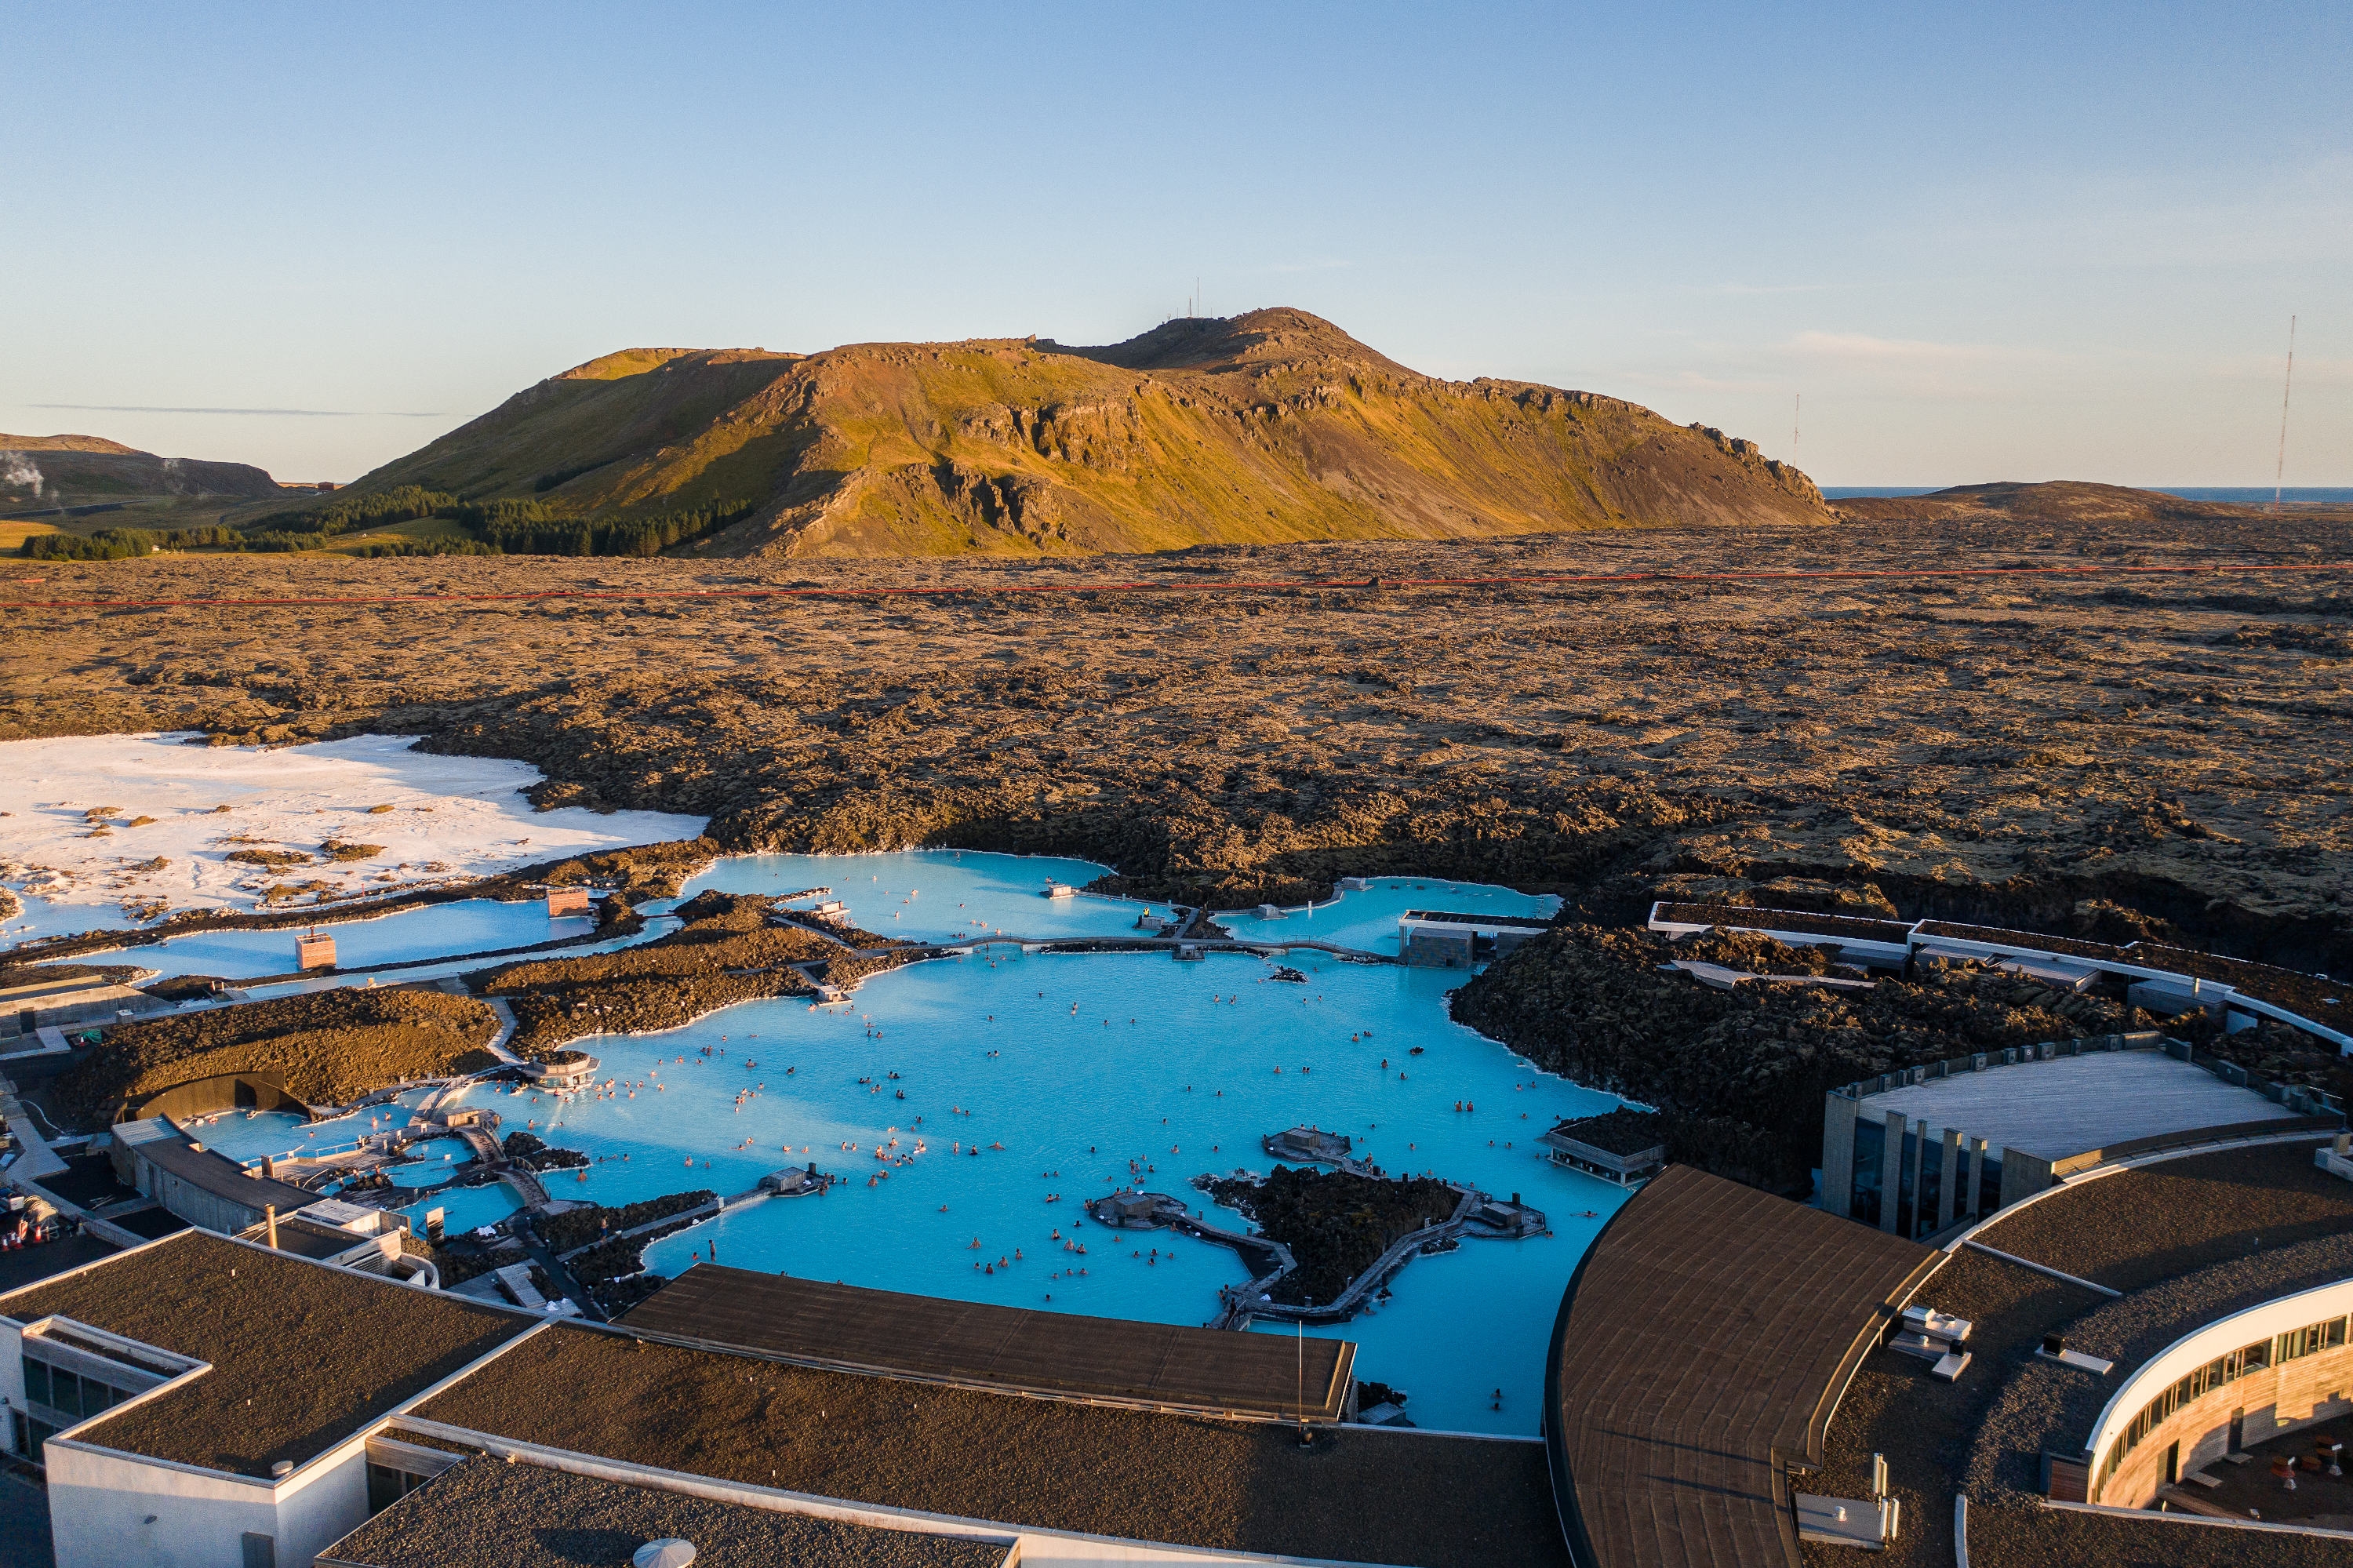 Aerial photo of Blue Lagoon geothermal bathing complex, with the mountain Þorbjörn in the background